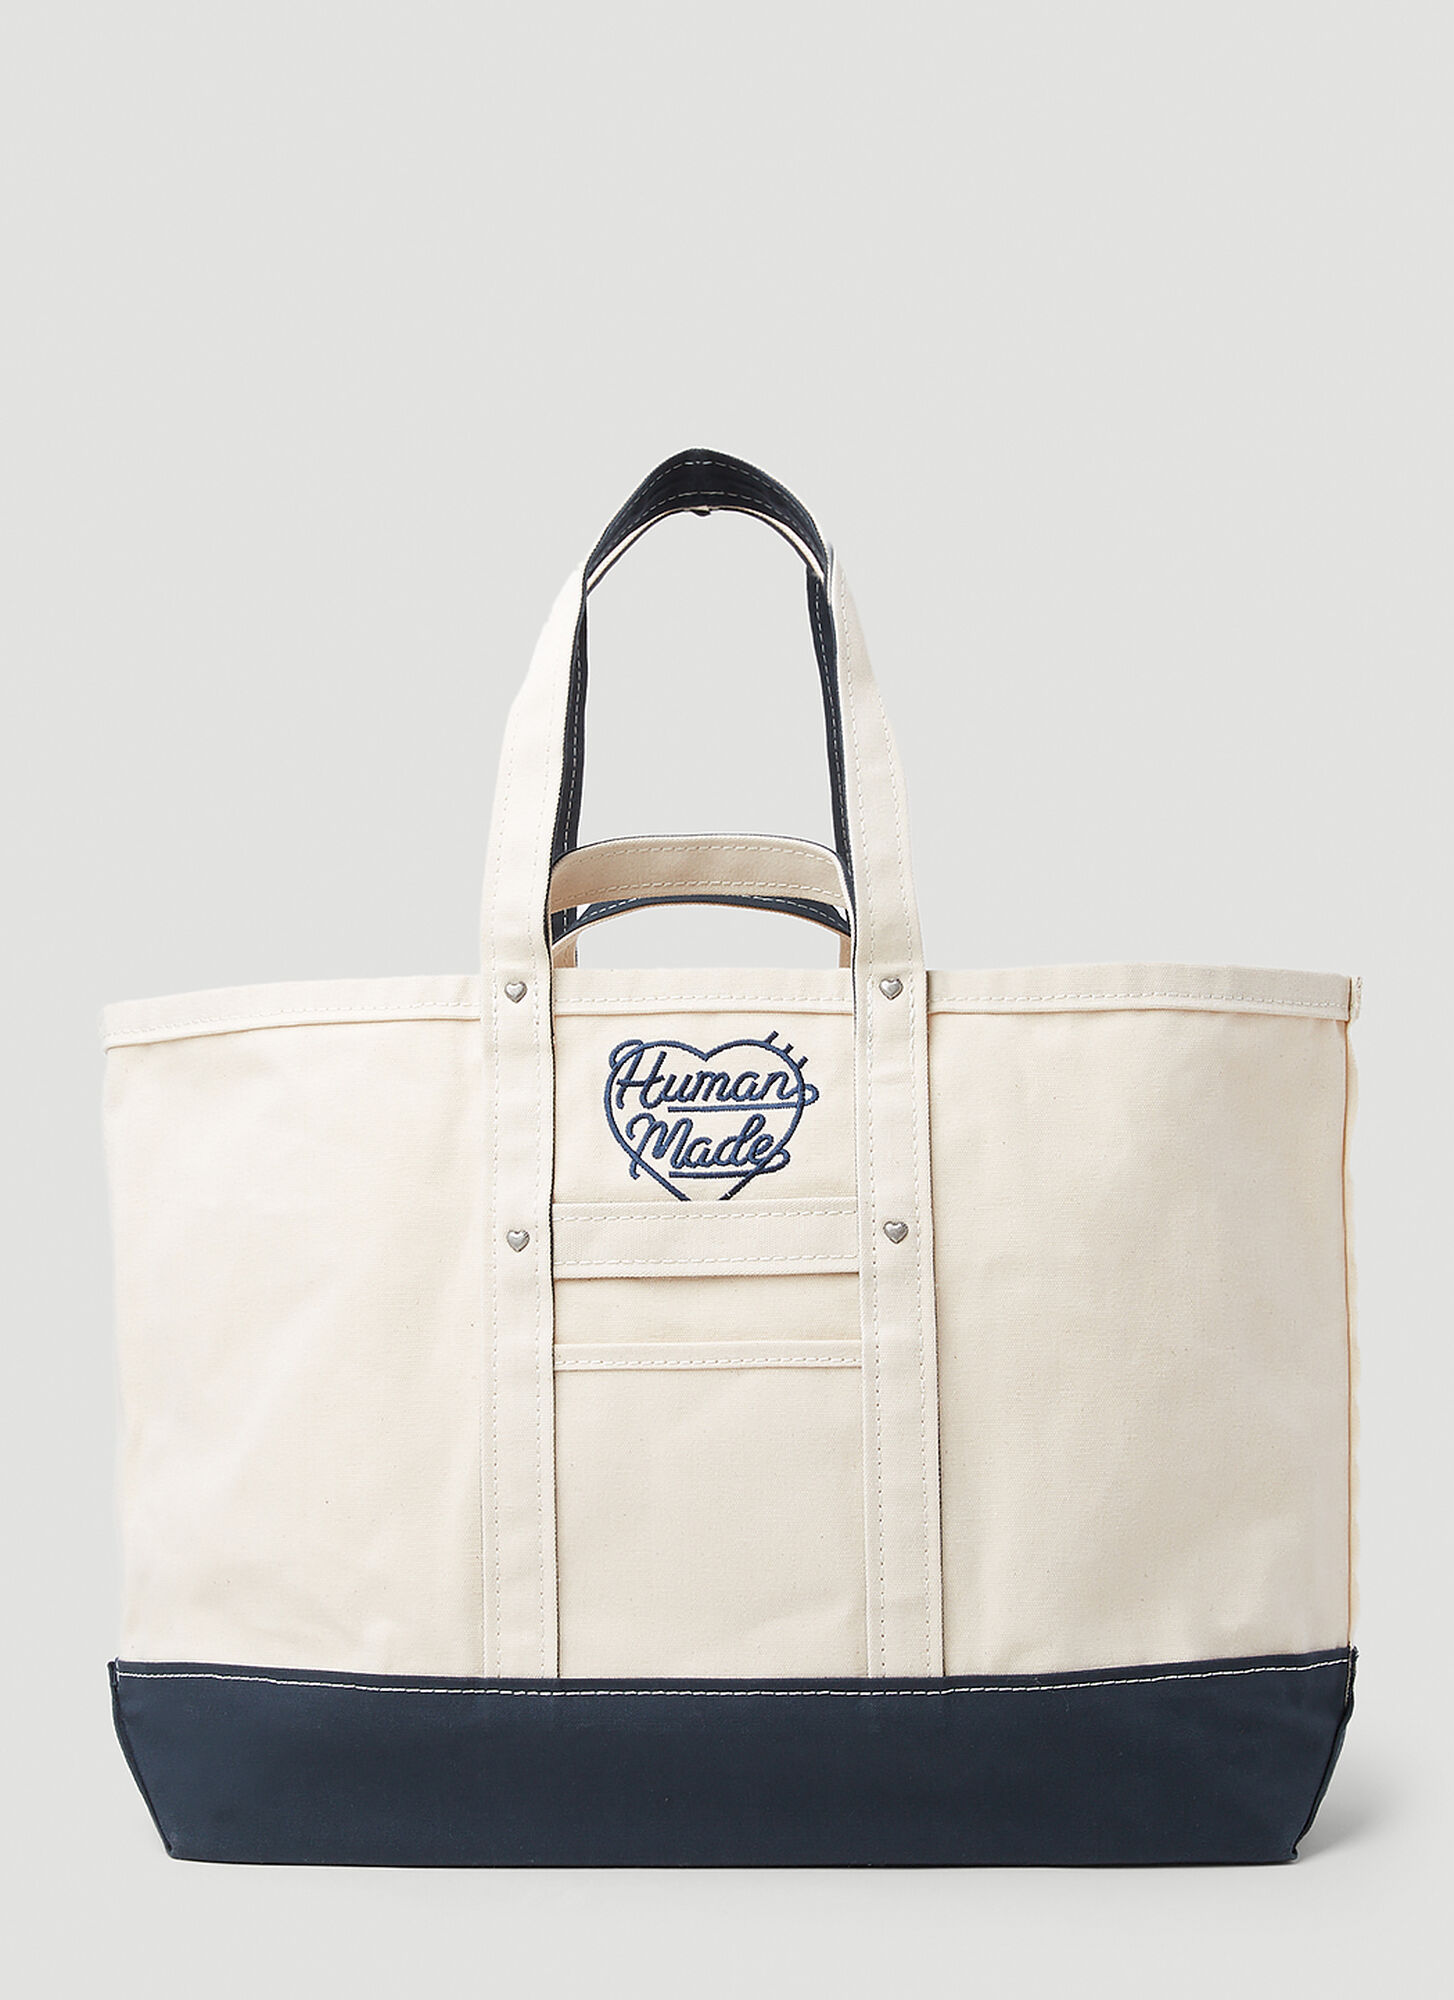 Human Made Canvas Tote Bag In Black